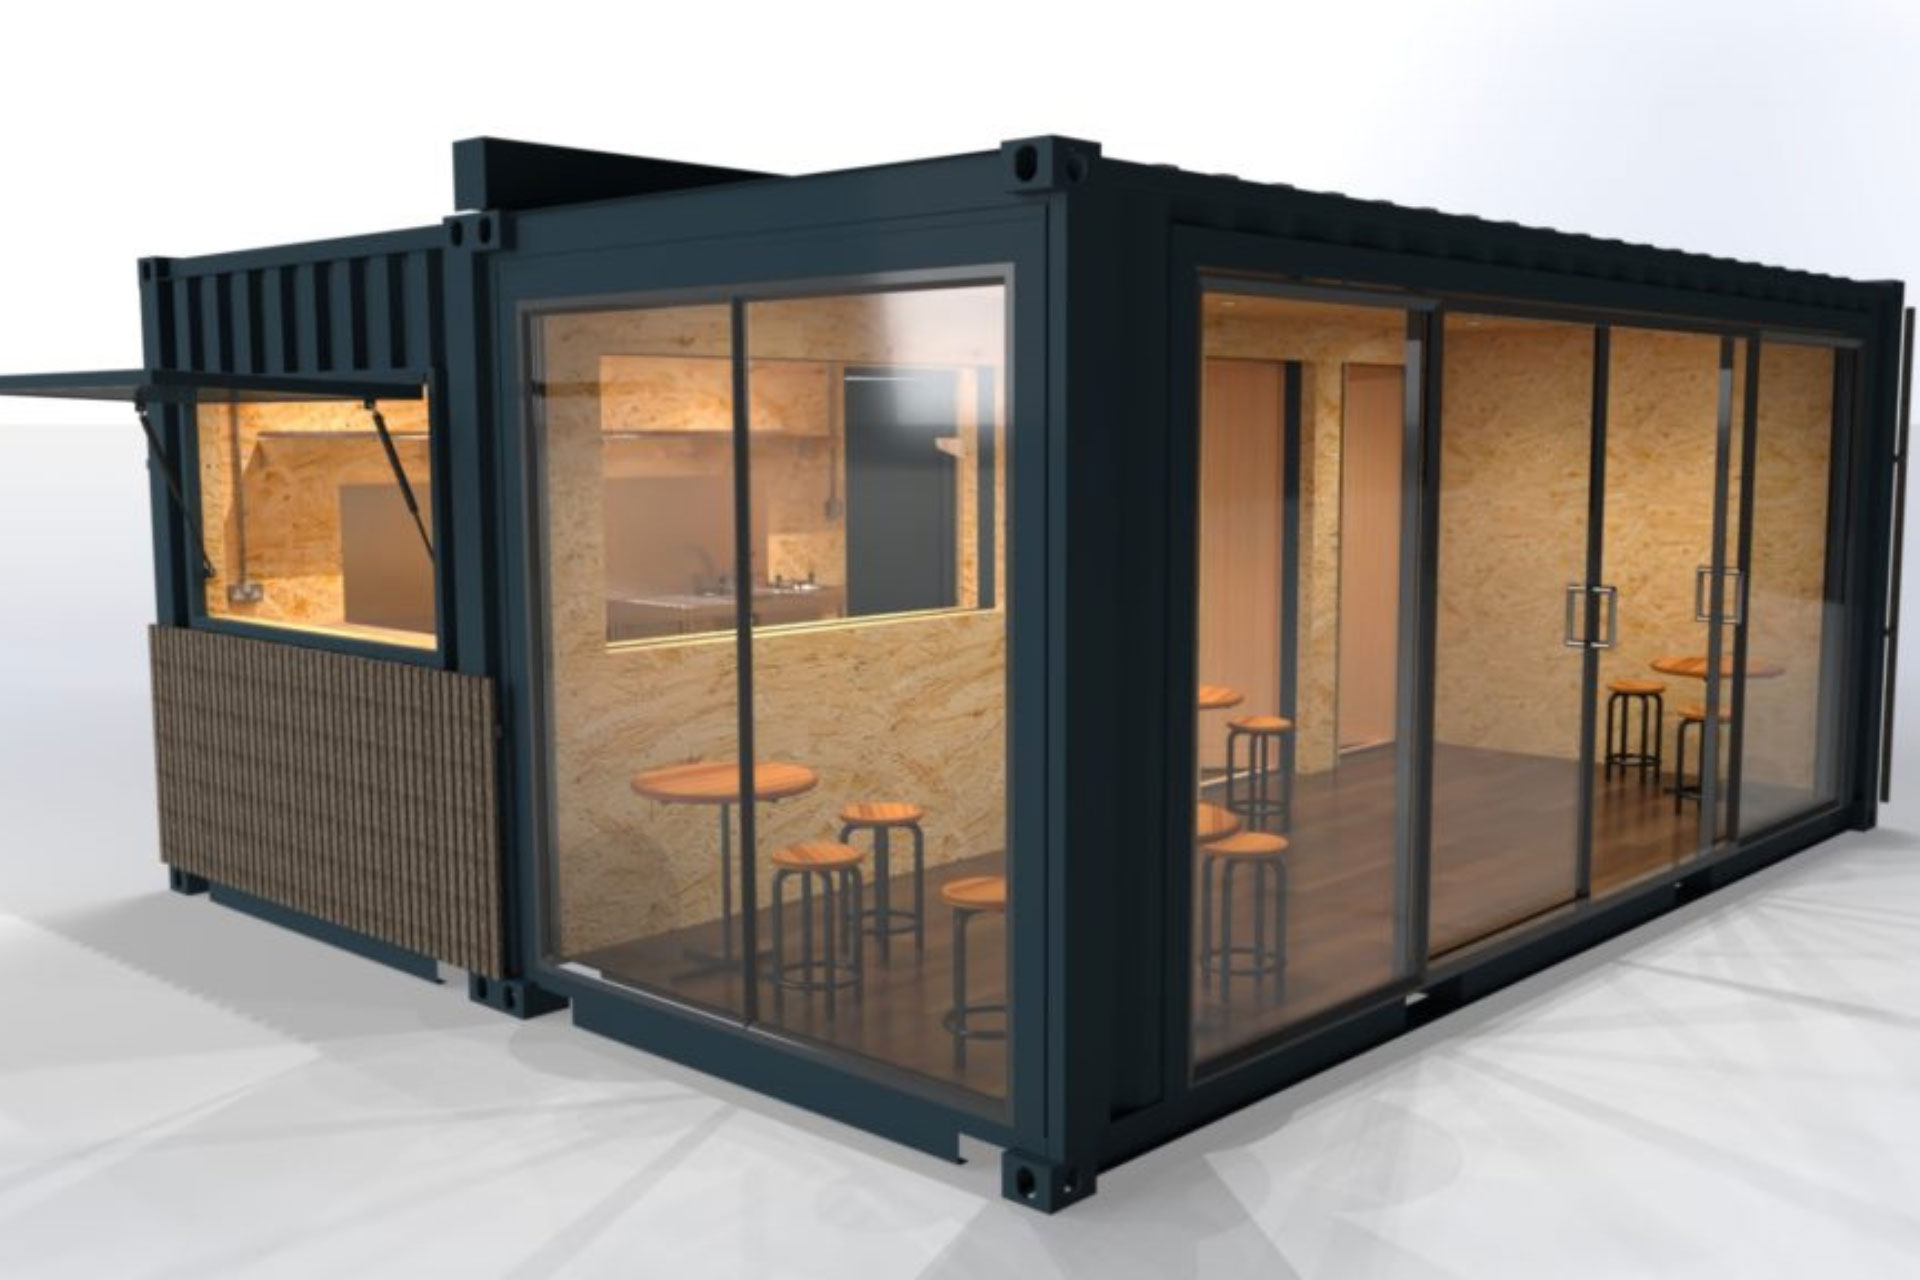 Container cafe conversion - customer concept